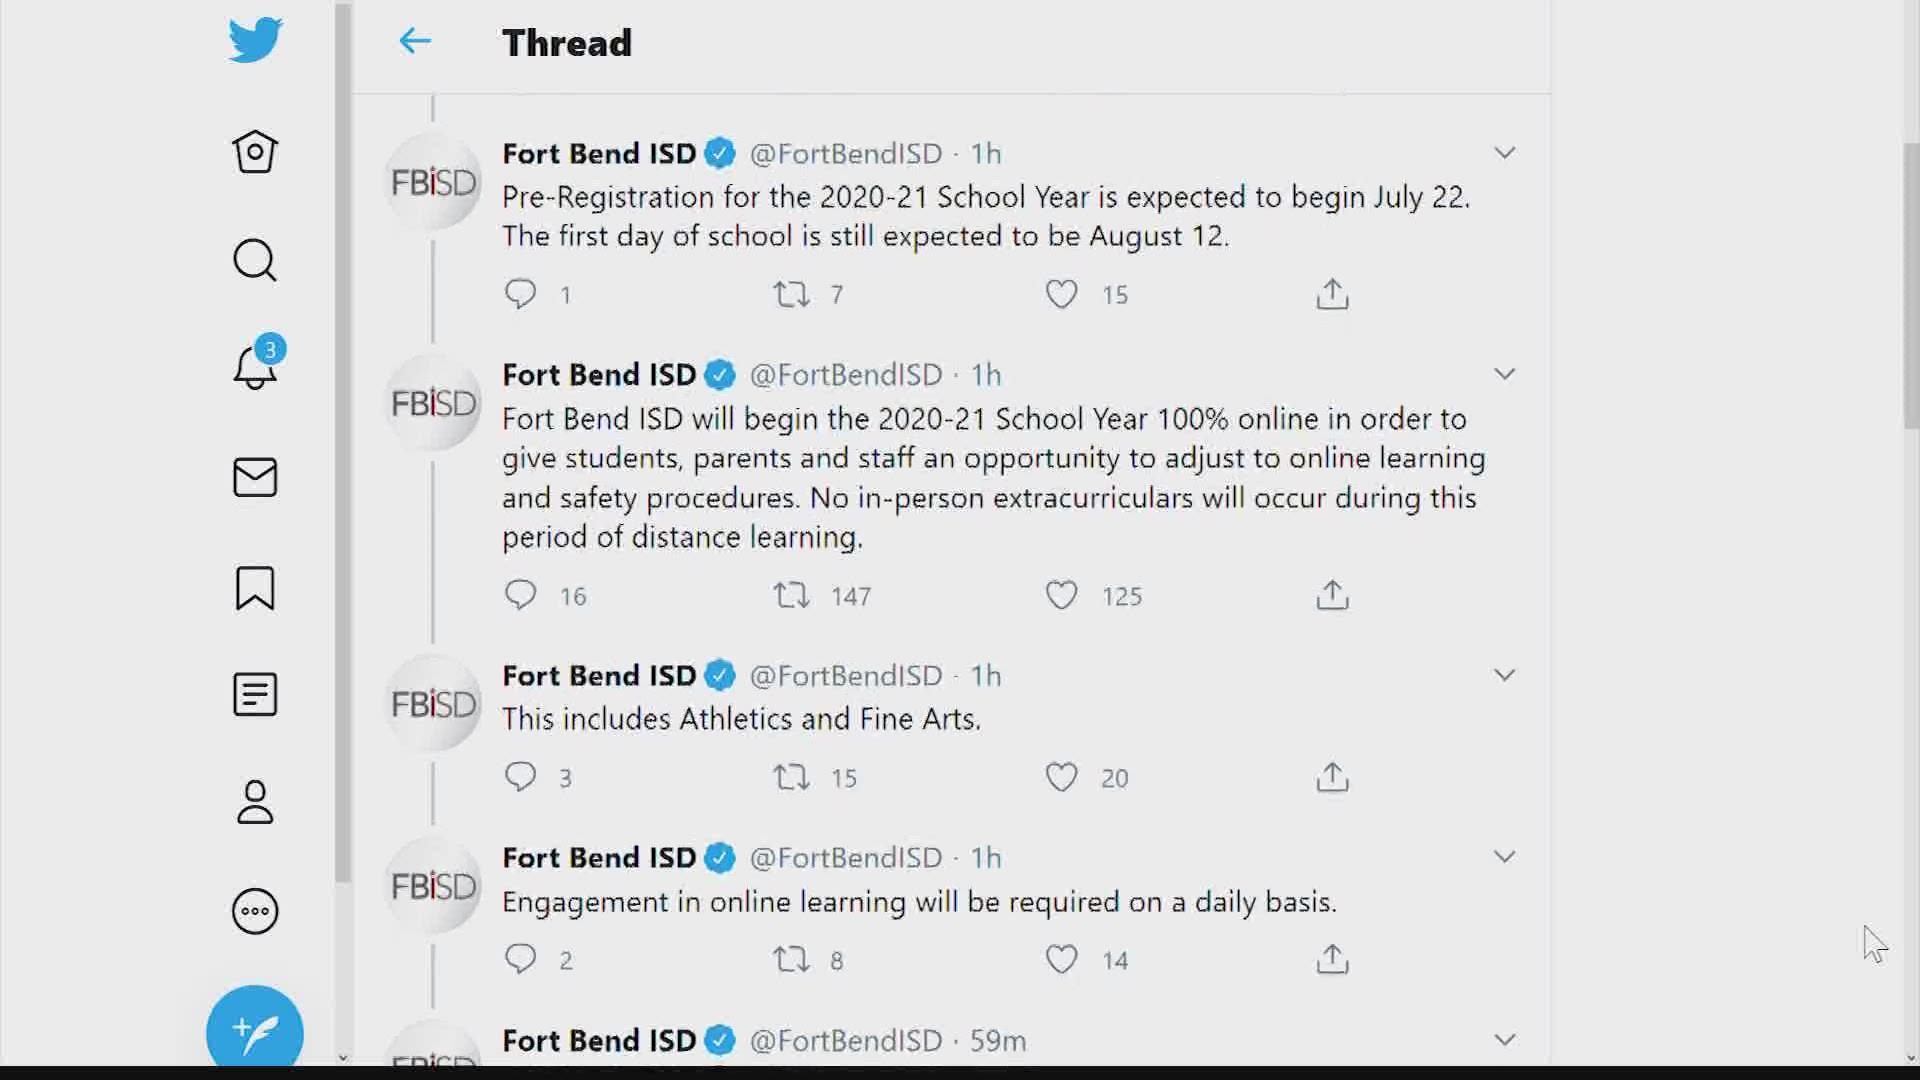 There will be no in-person learning going on in Fort Bend ISD to start the 2020-21 school year.